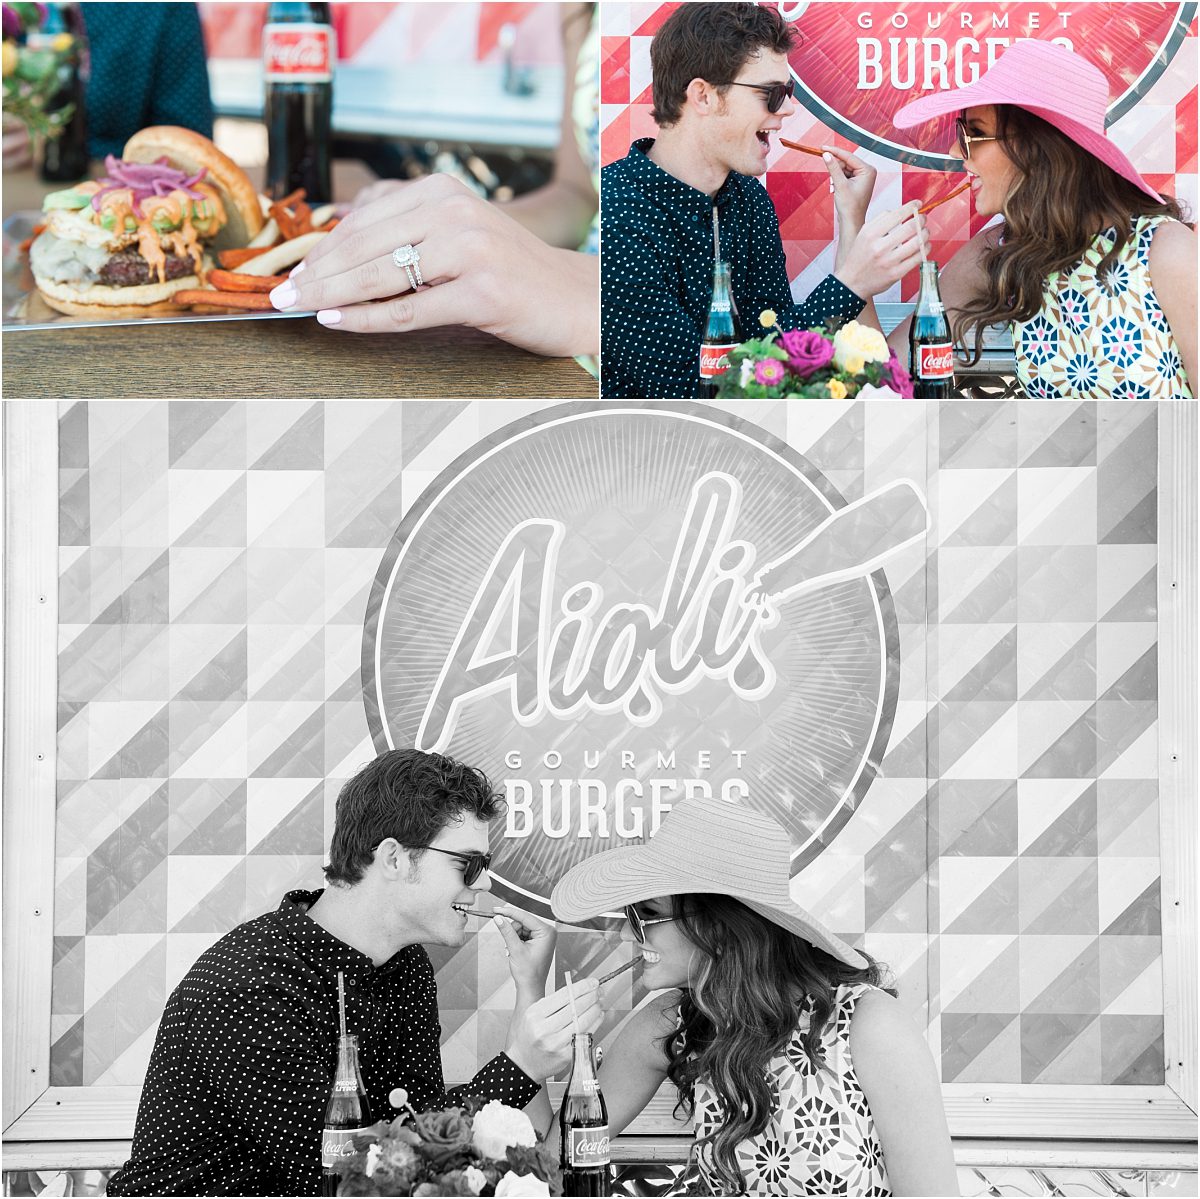 aioli gourmet burgers, food truck catering, couple eating burgers and fries, classic coca cola bottles, detail food photos,hotel valley ho, scottsdale, arizona, styled shoot, engagement session, food trucks, wedding weekend, pool party, phoenix wedding planner, event design